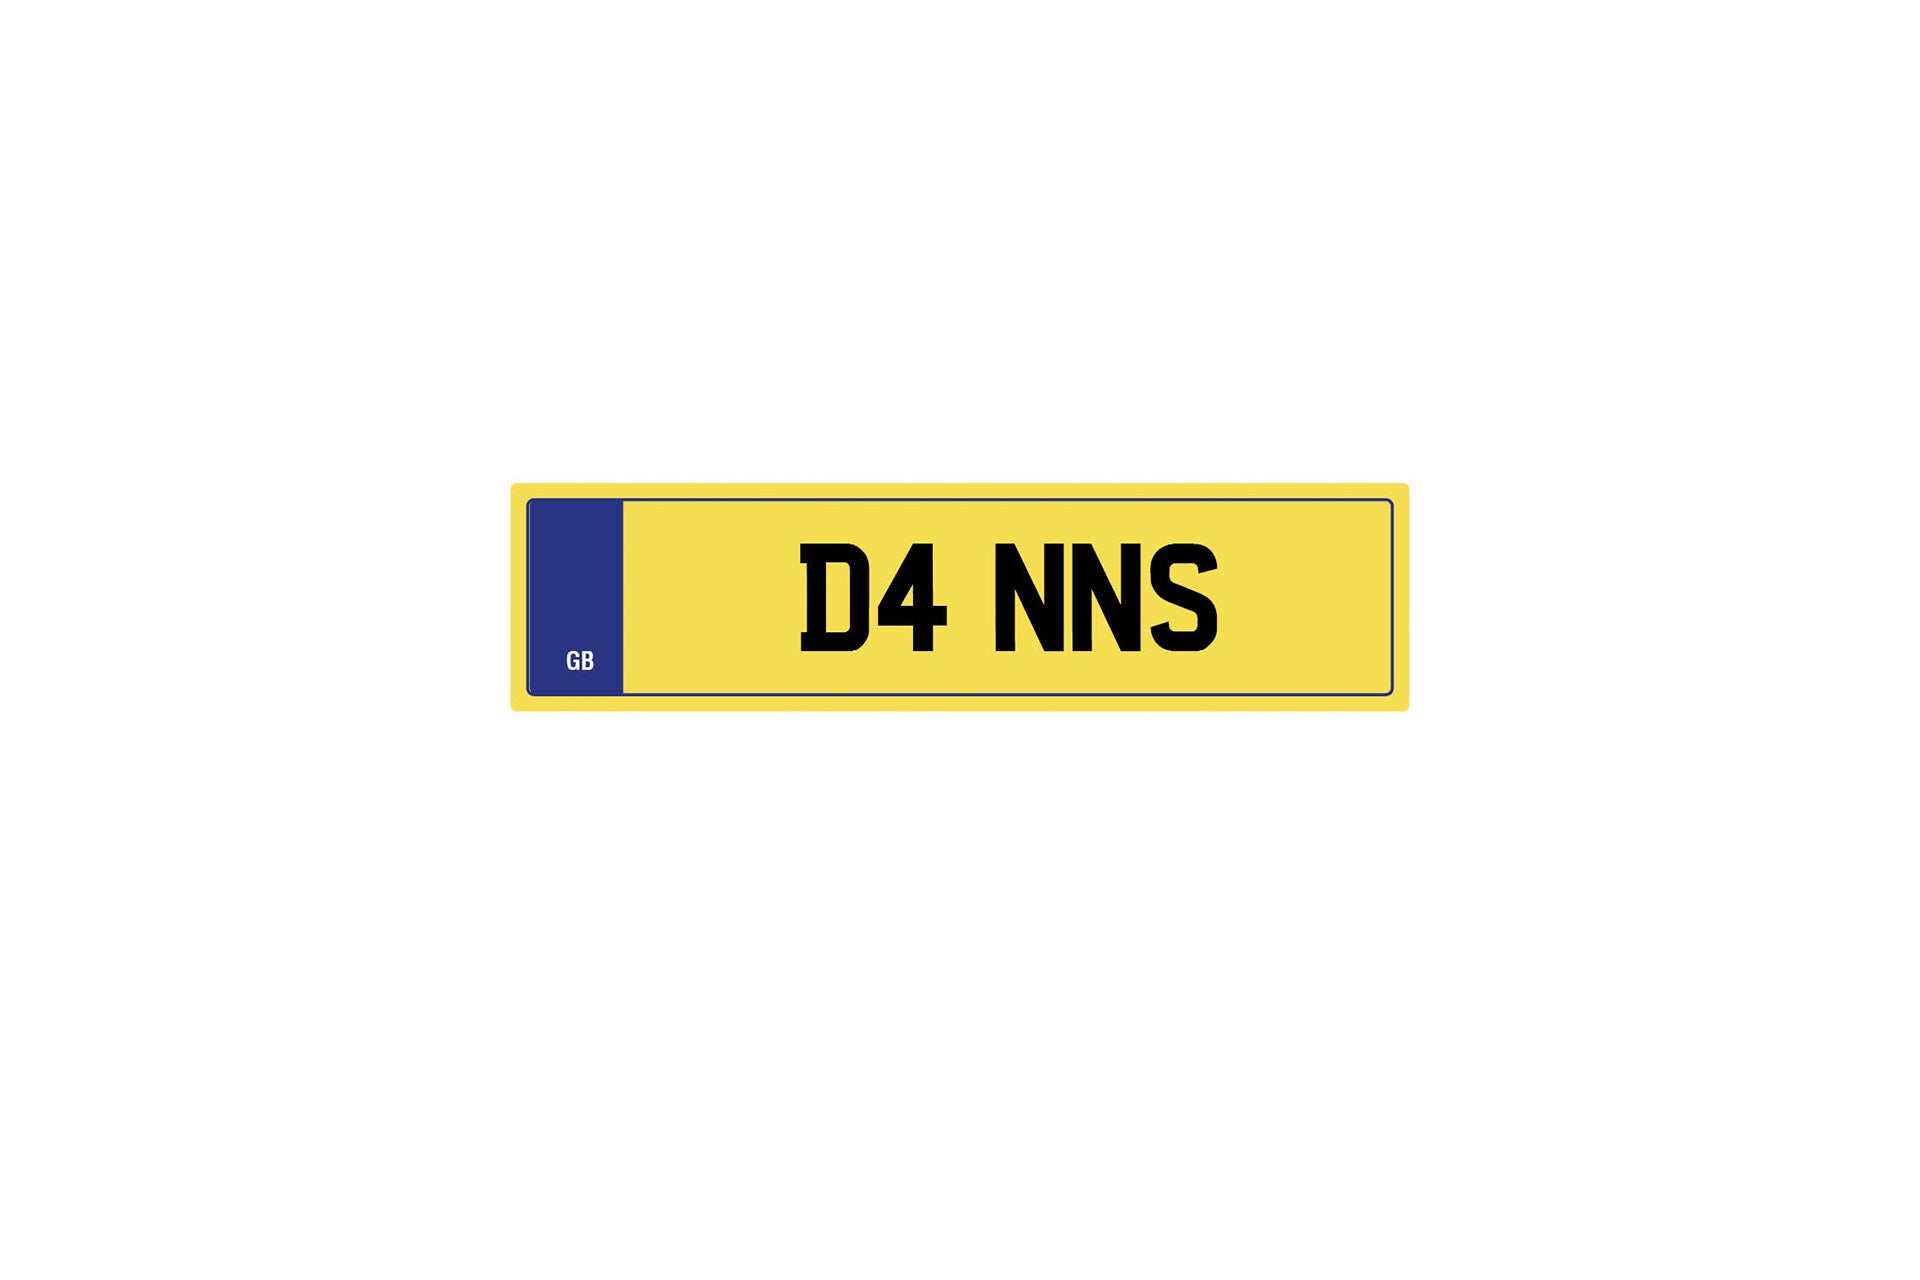 Private Plate D4 NNS